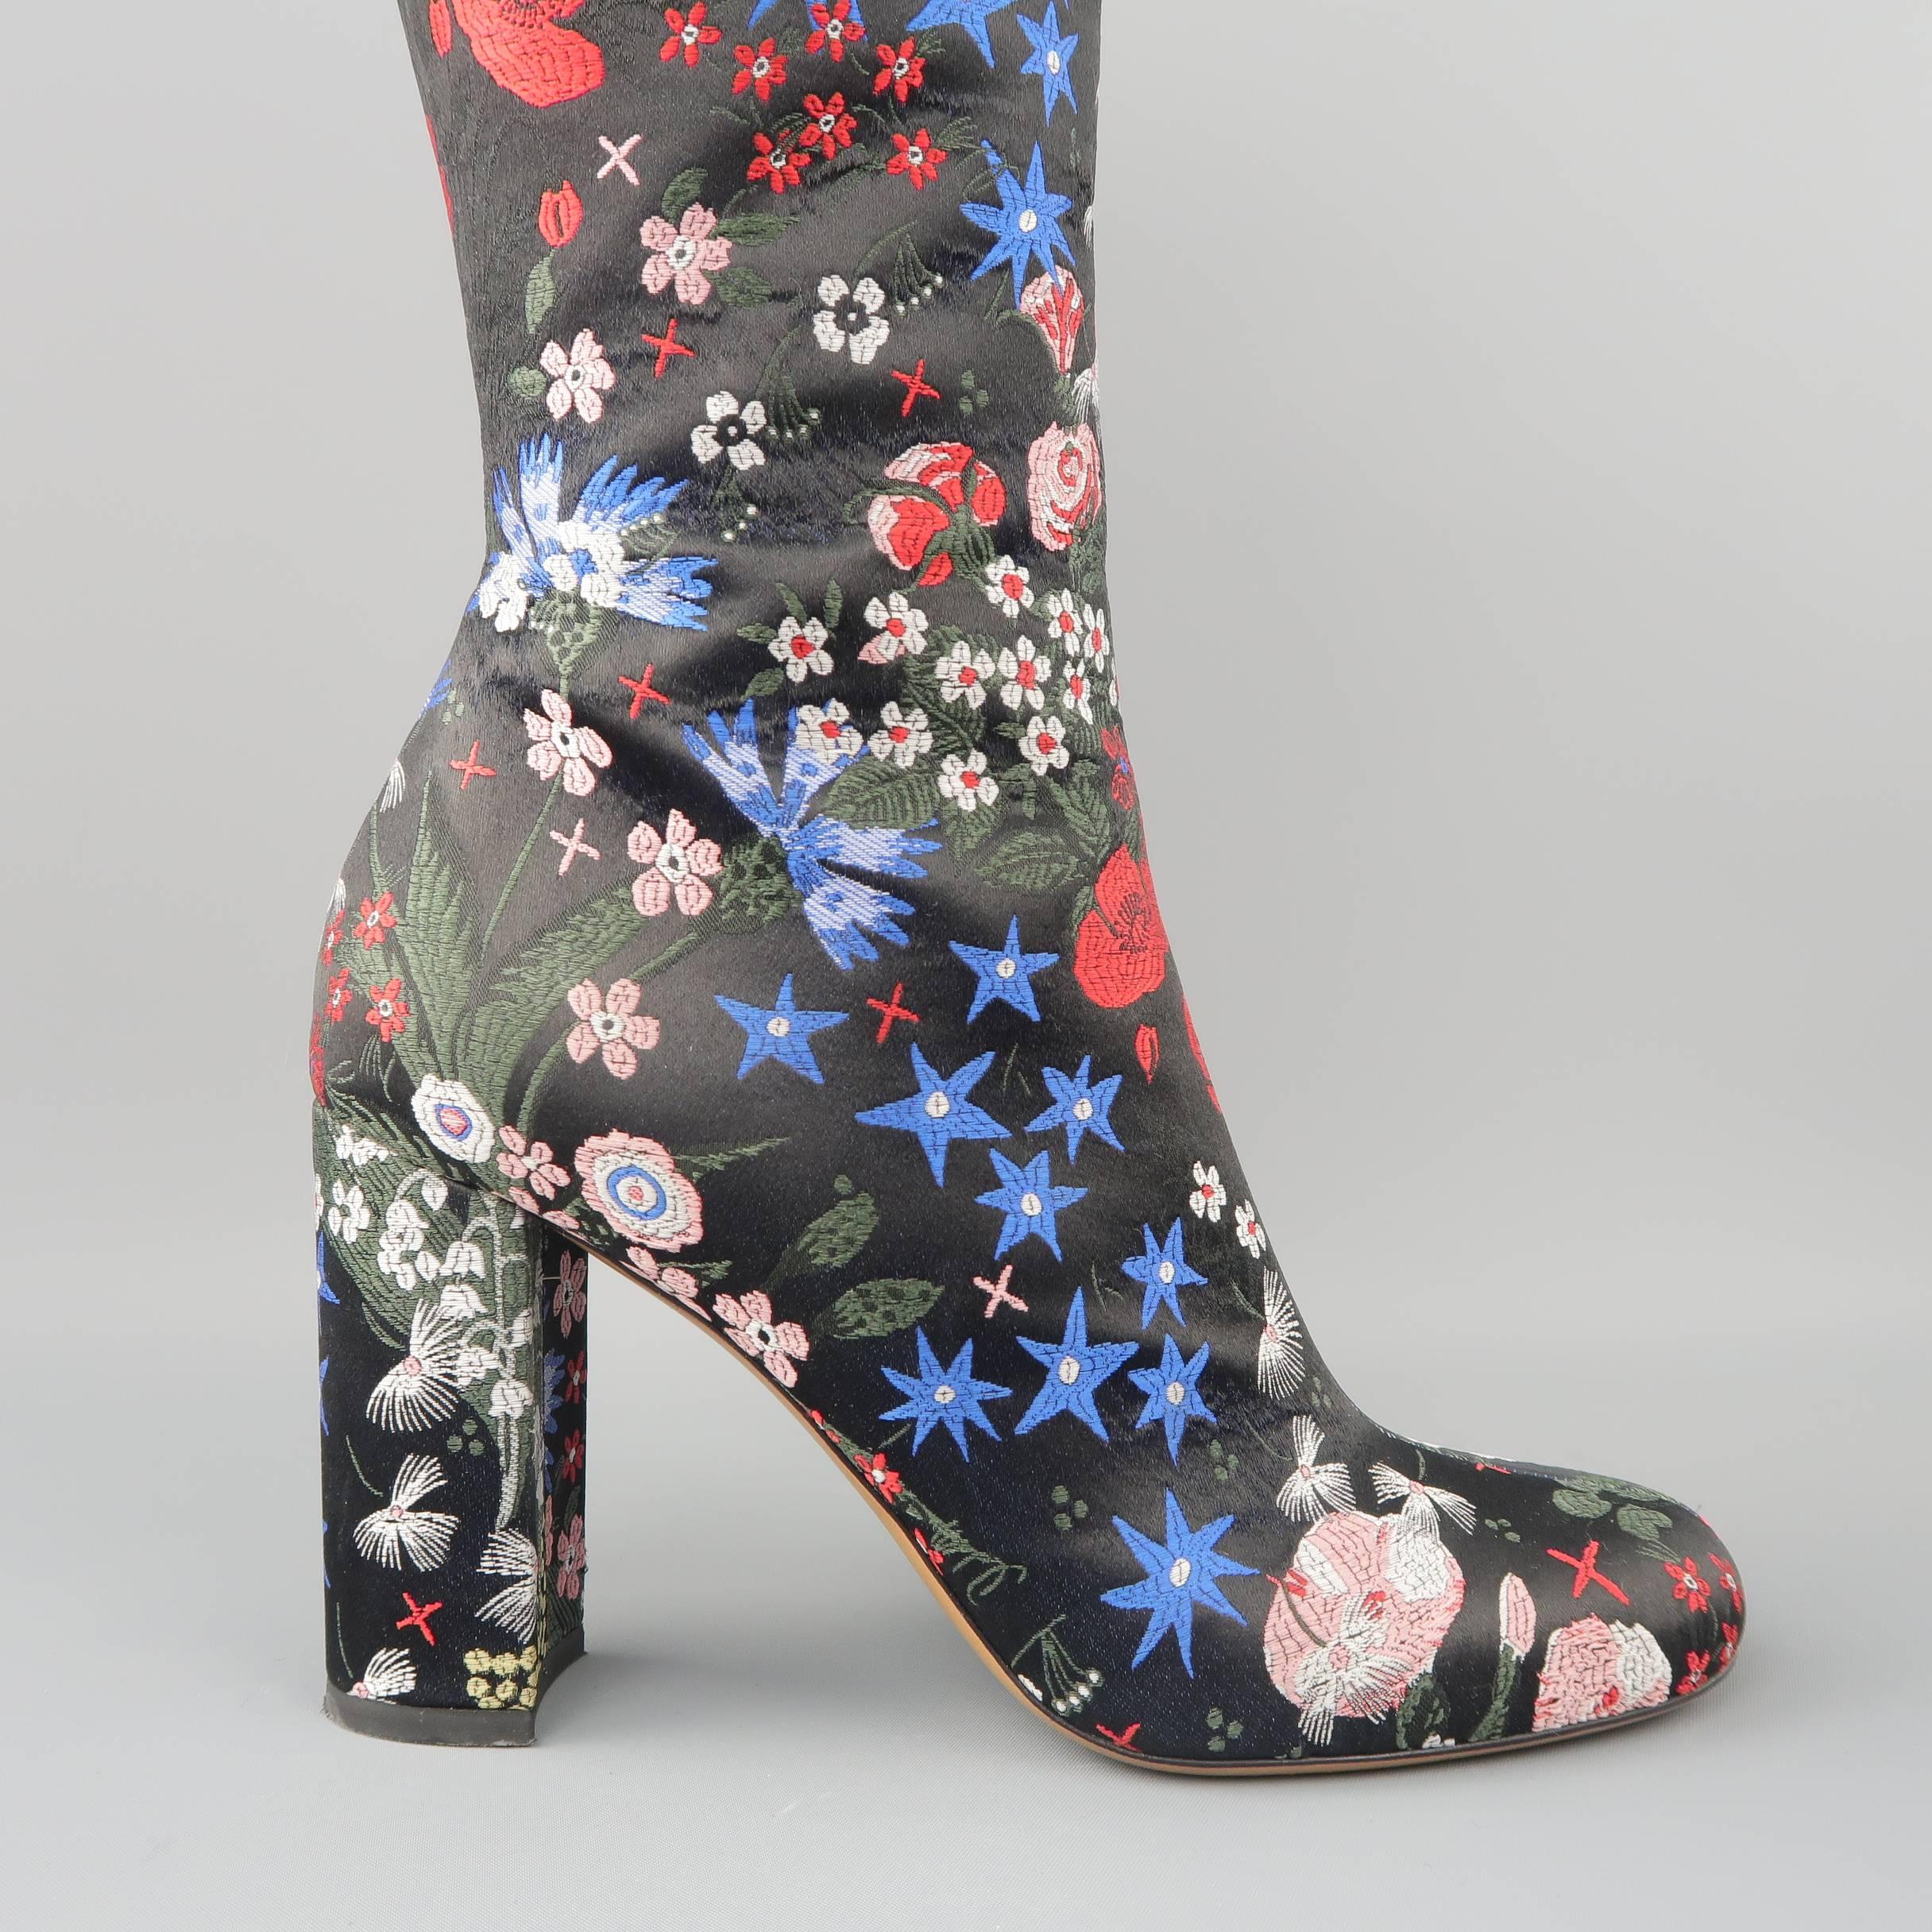 Valentino Boots - Pre-Fall 2015 Runway - Black MultiColor Floral Satin Knee High 1